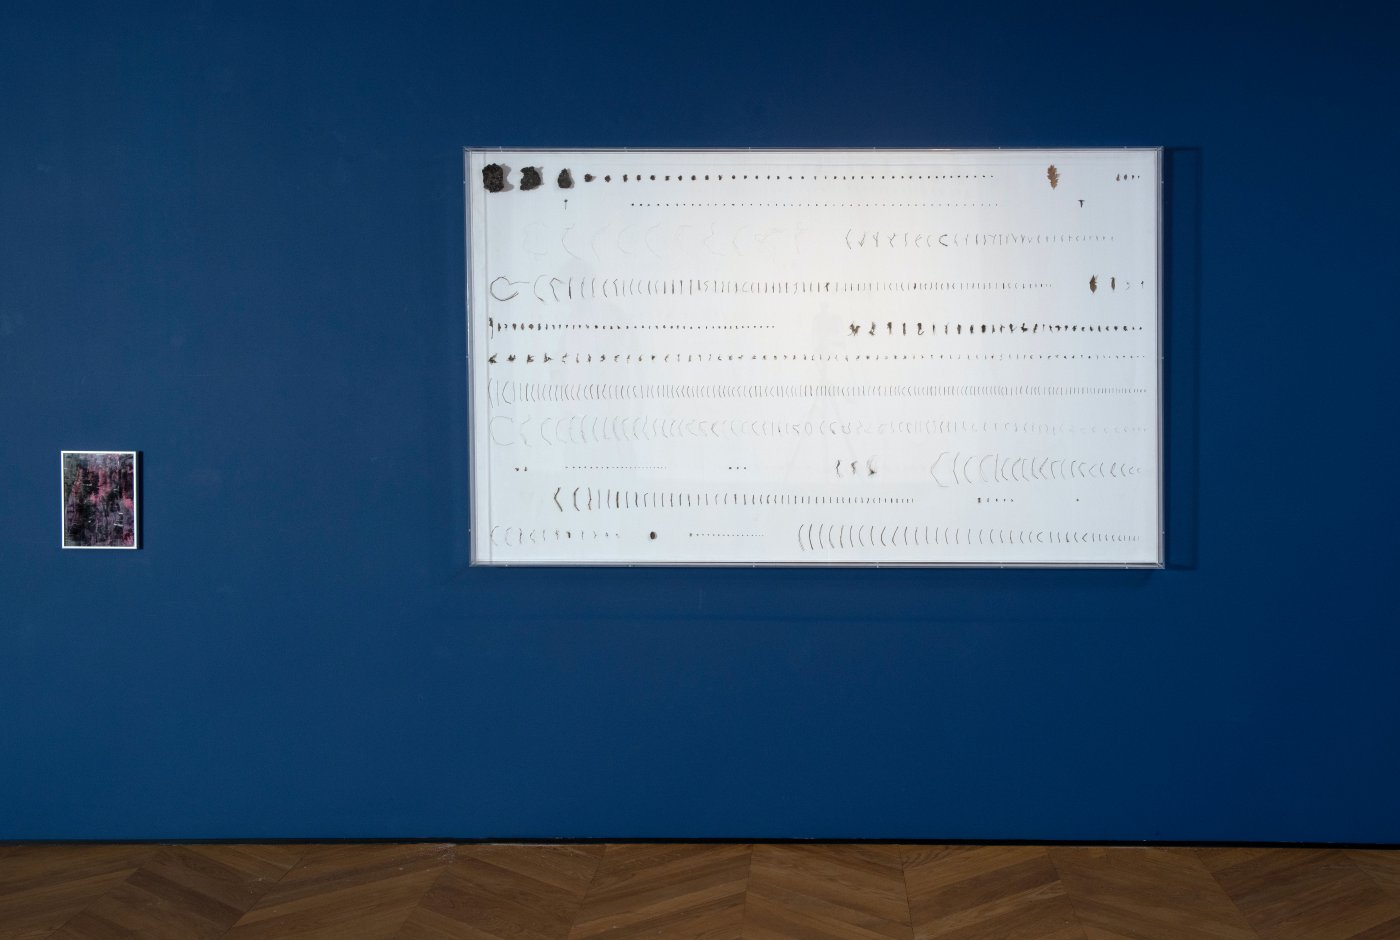 Installation image for Humble Works, at Colnaghi